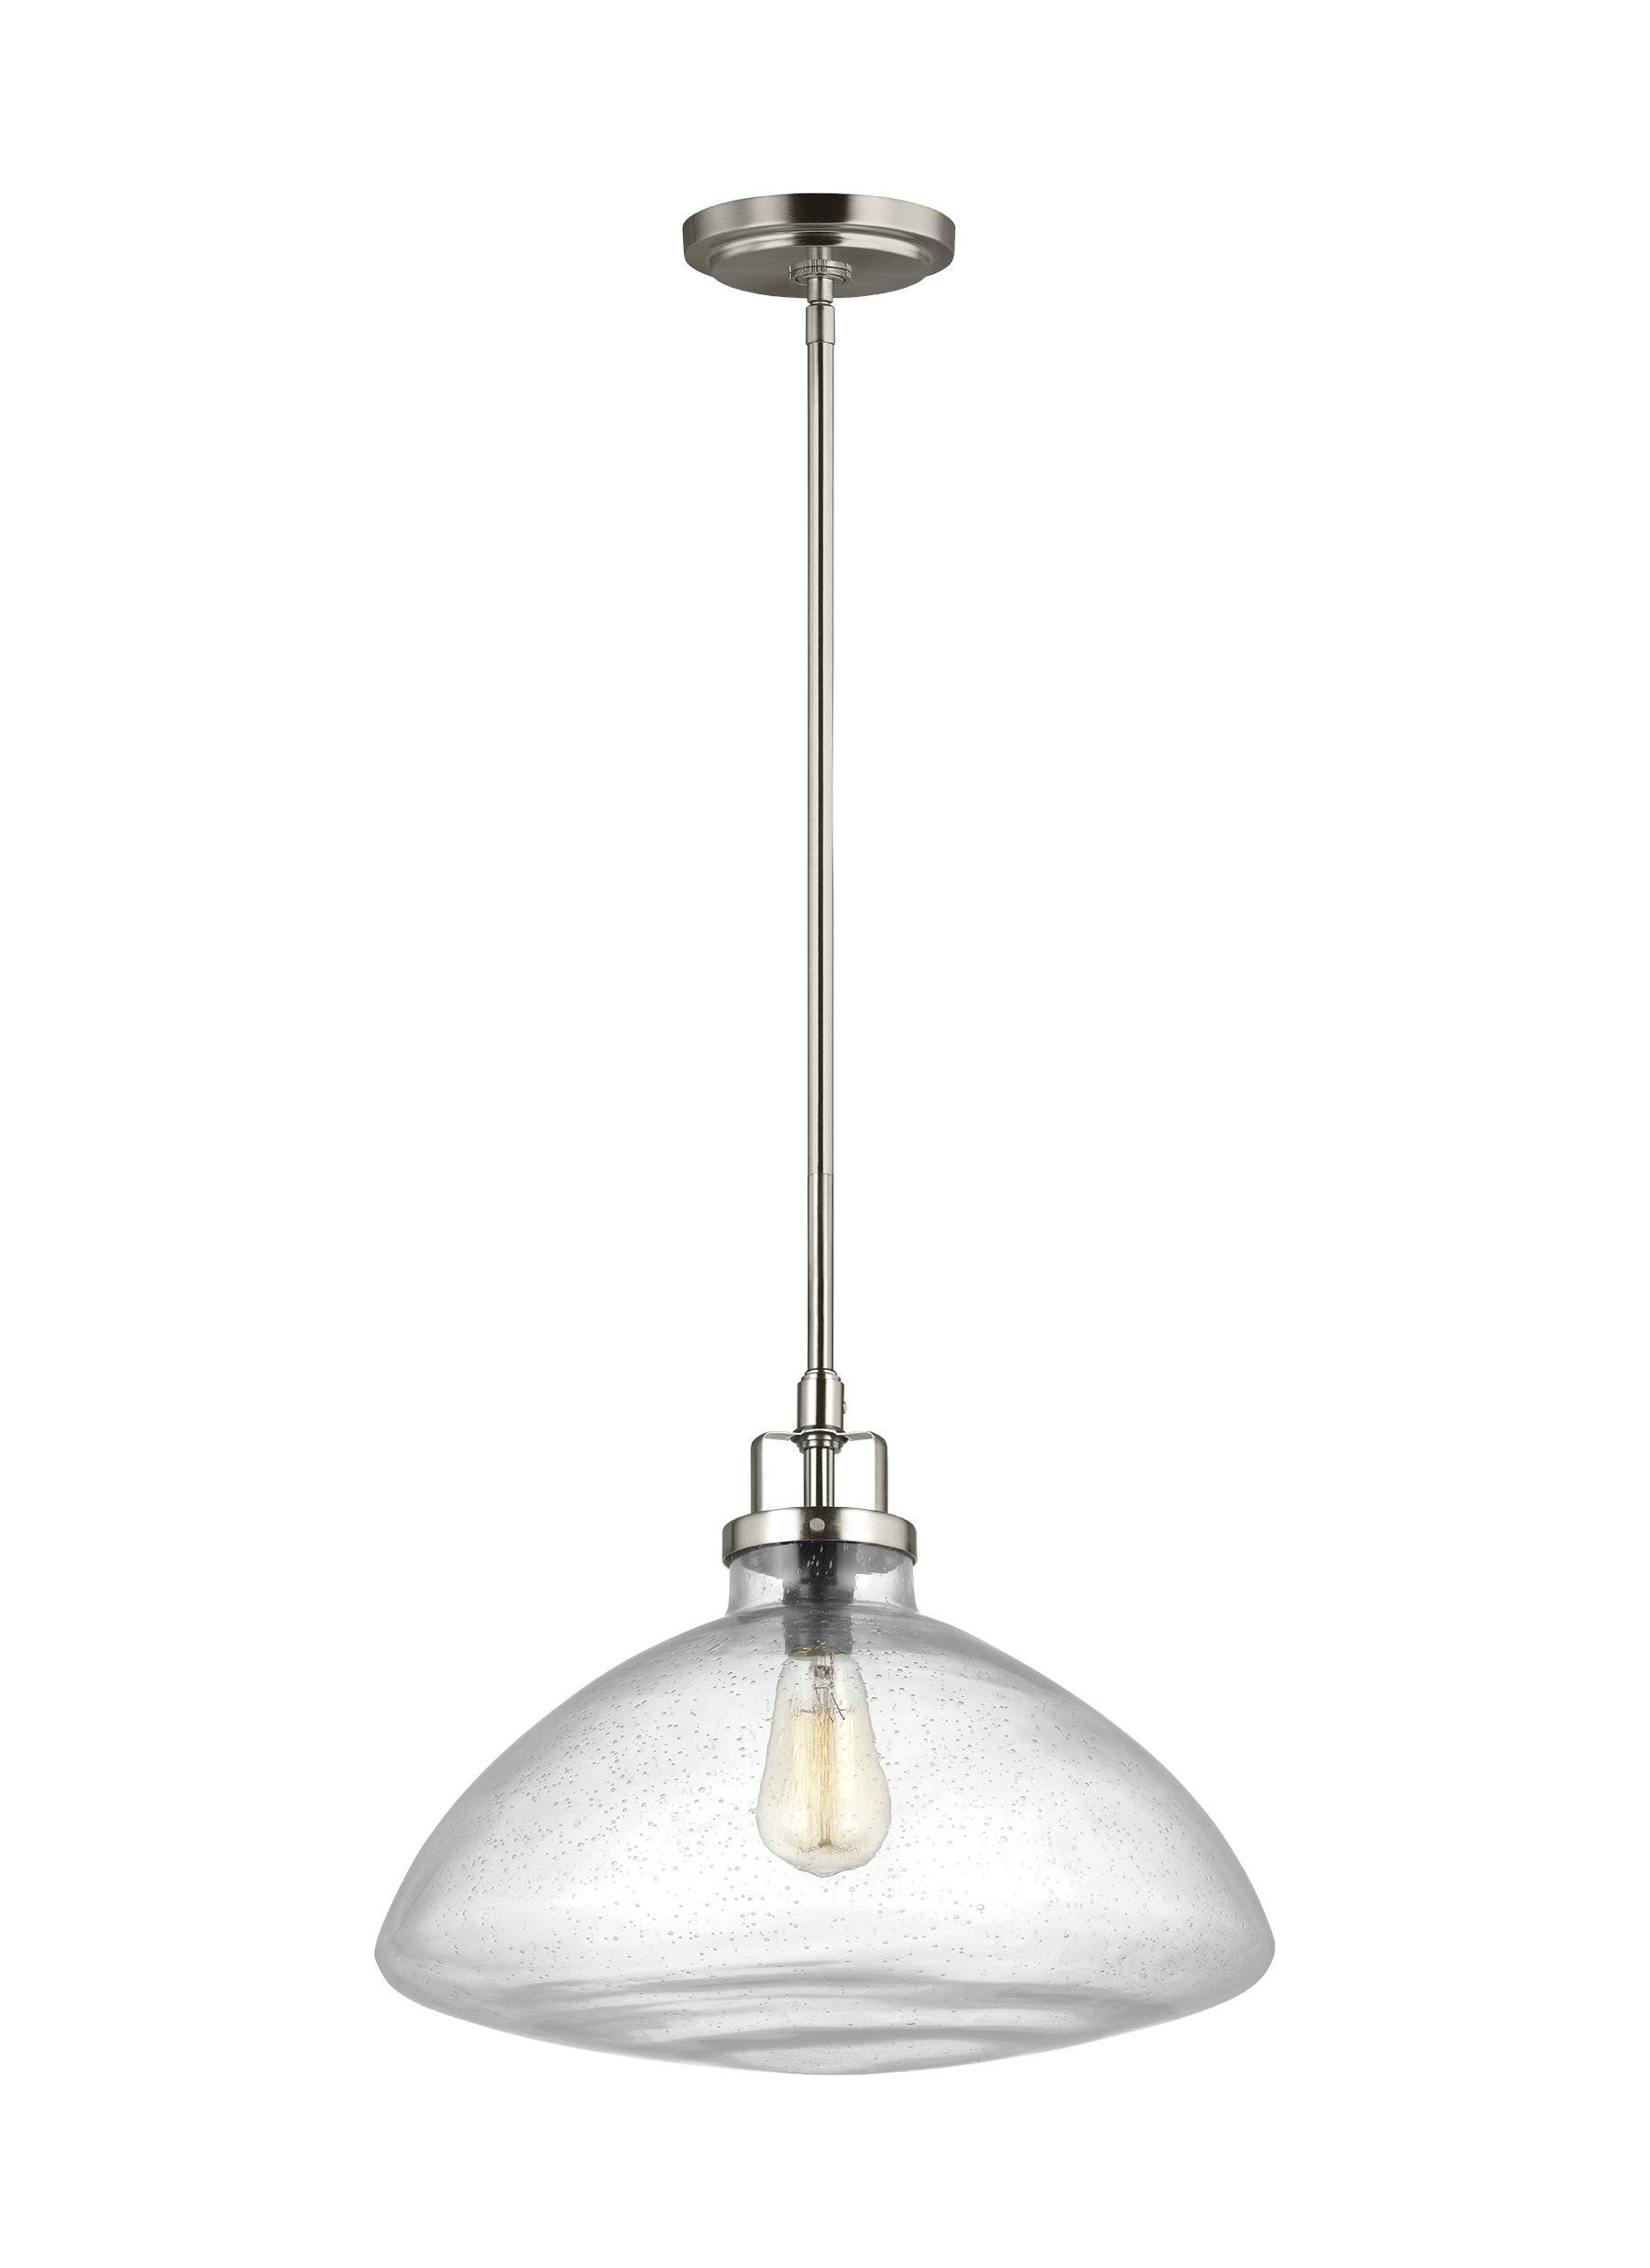 Houon 1 Light Single Schoolhouse Pendant With Goldie 1 Light Single Bell Pendants (View 16 of 30)